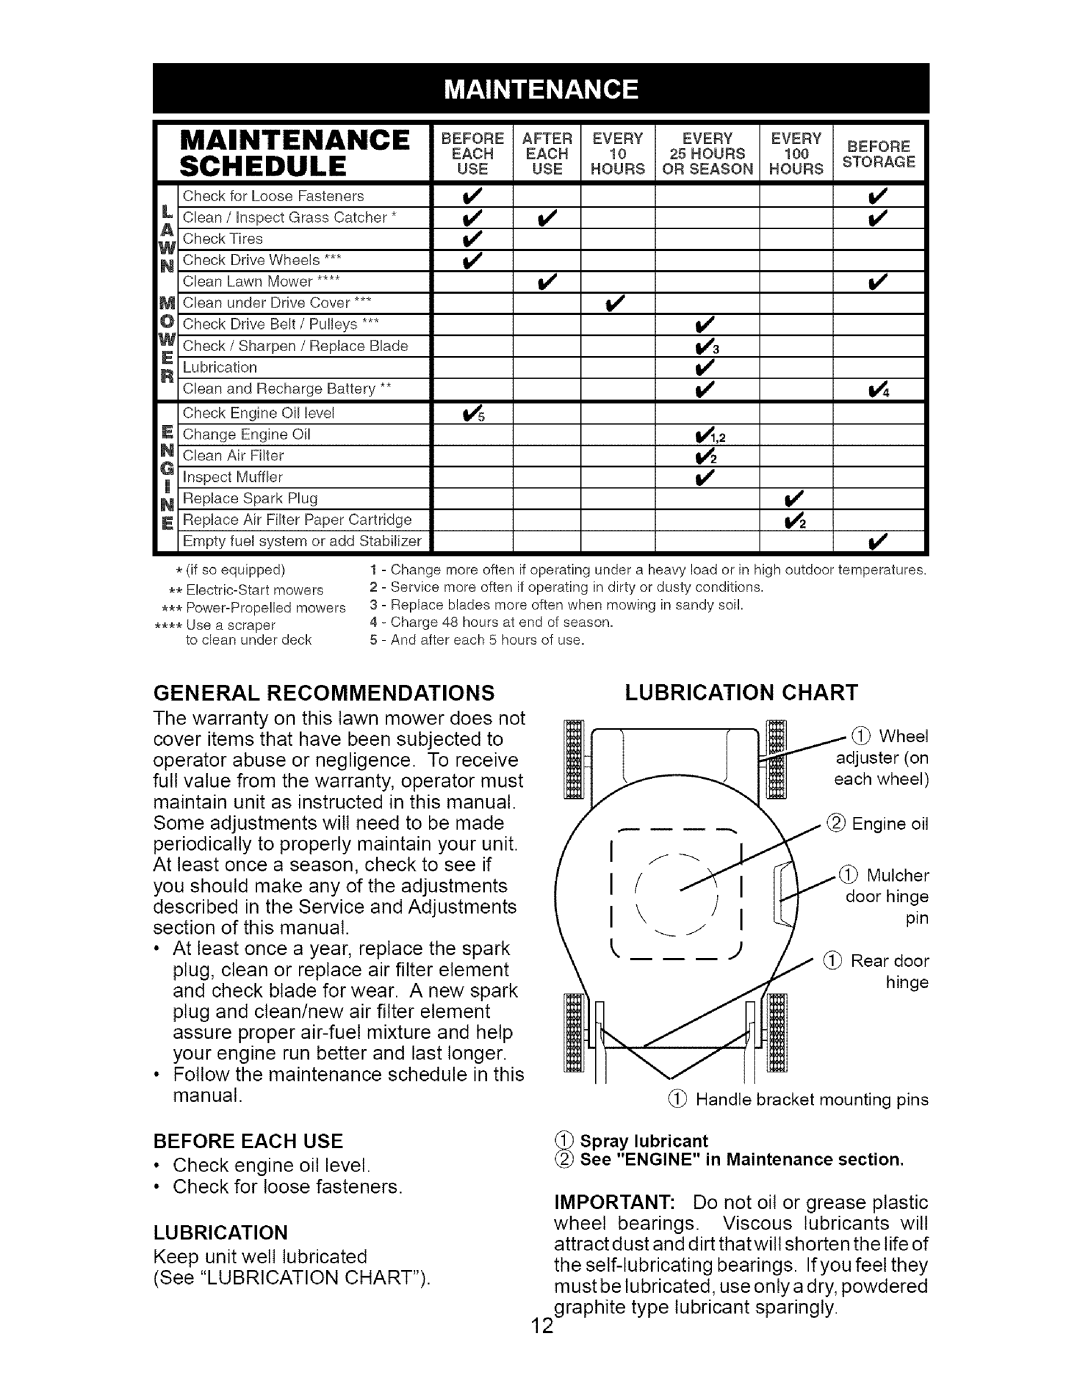 Craftsman 917.37667 owner manual Schedule, Lubrication Chart, General Recommendations, Lu Brication, _ Spray lubricant 